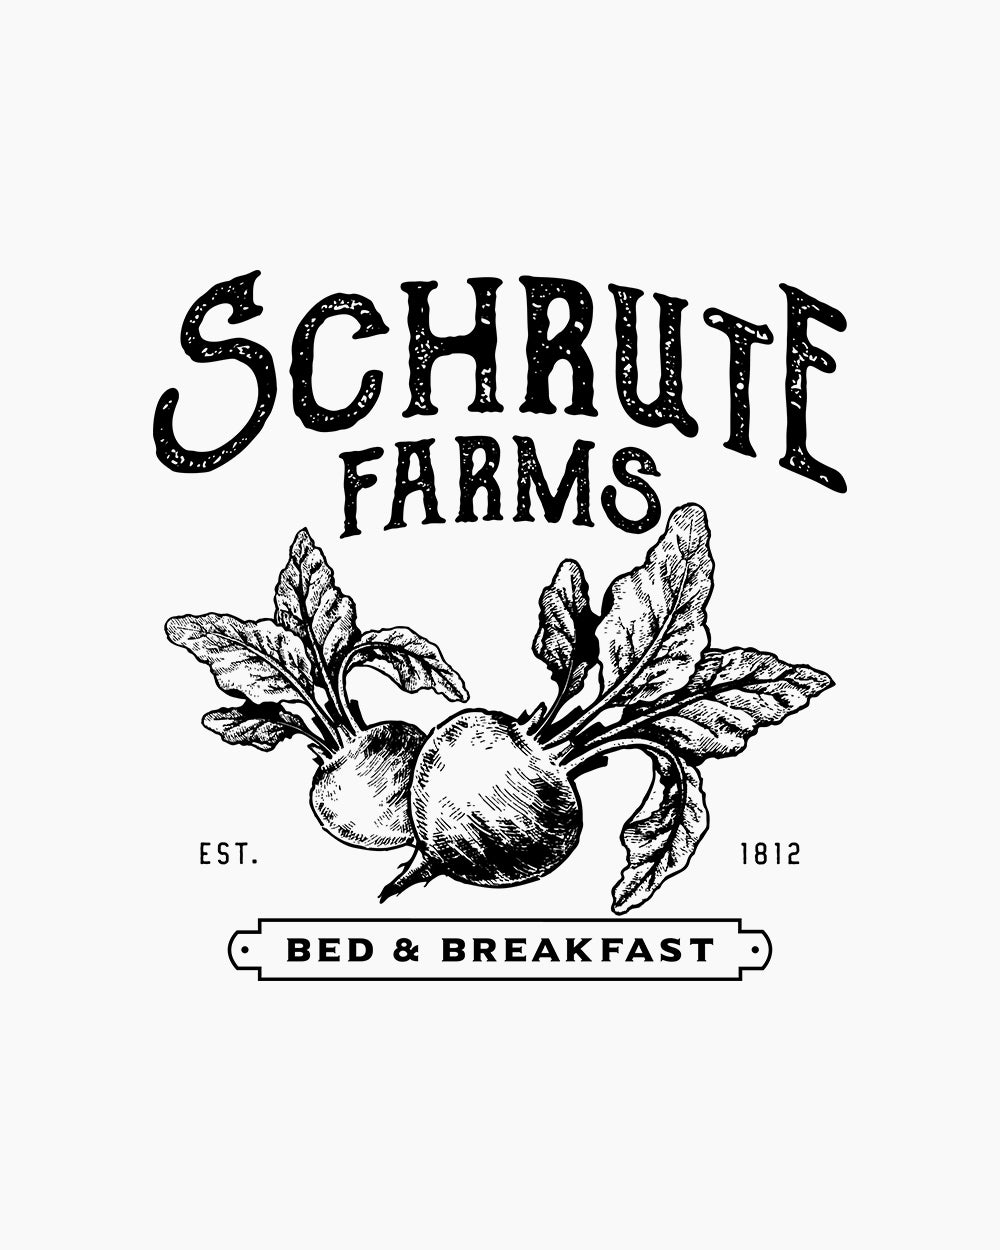 Schrute Farms Hoodie Europe Online #colour_white